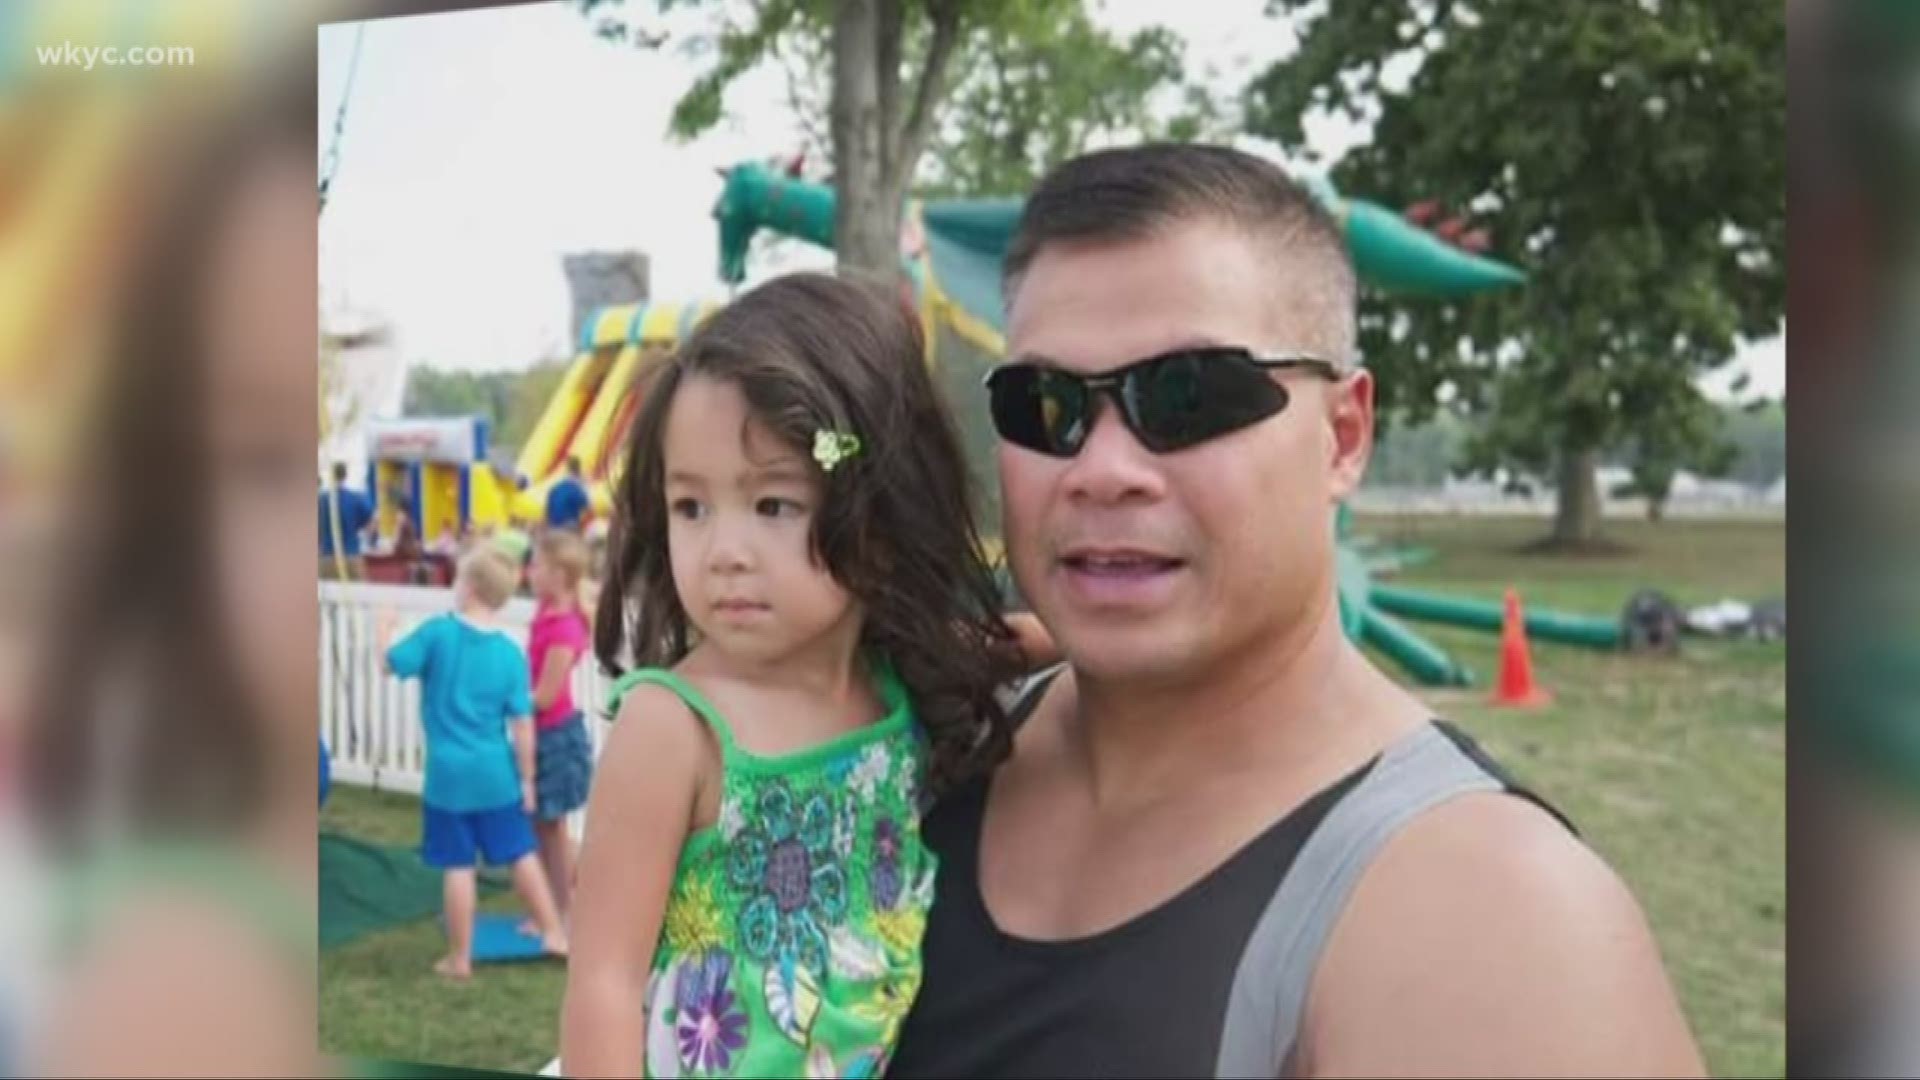 July 12, 2018: The community is coming together to offer their final respects to Cleveland officer Vu Nguyen.